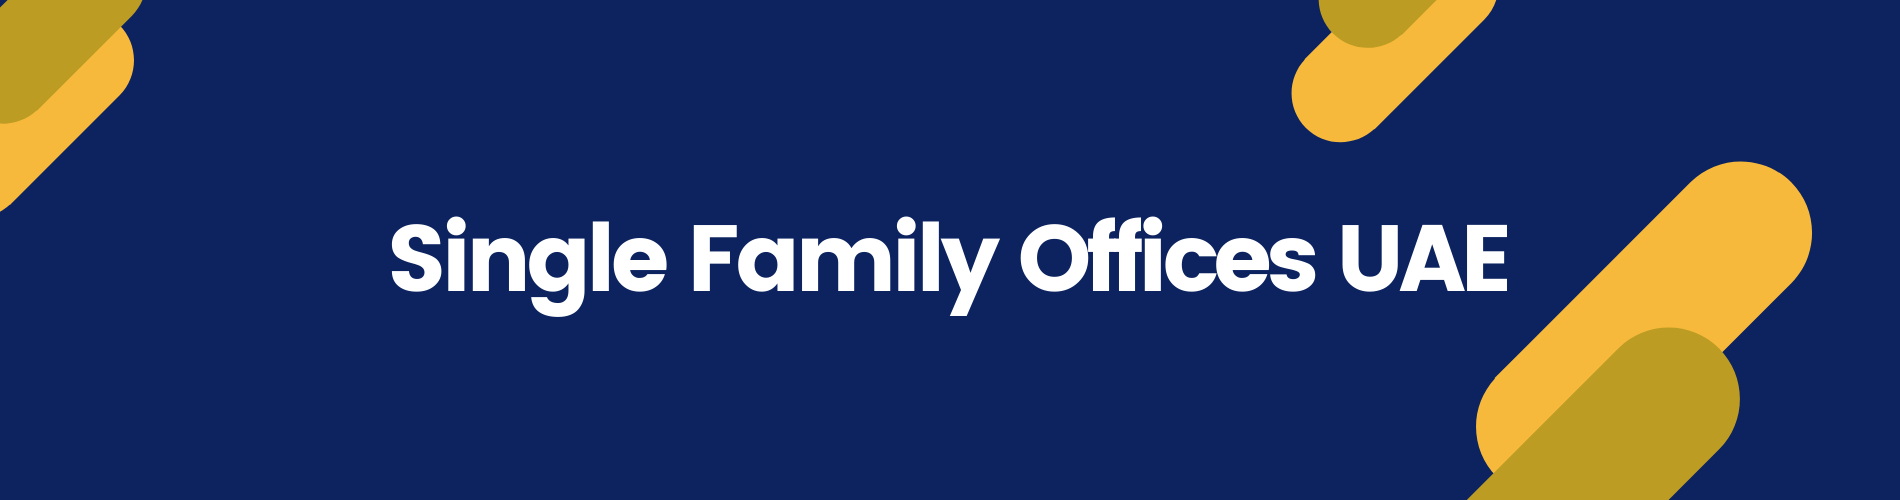 Single Family Offices UAE